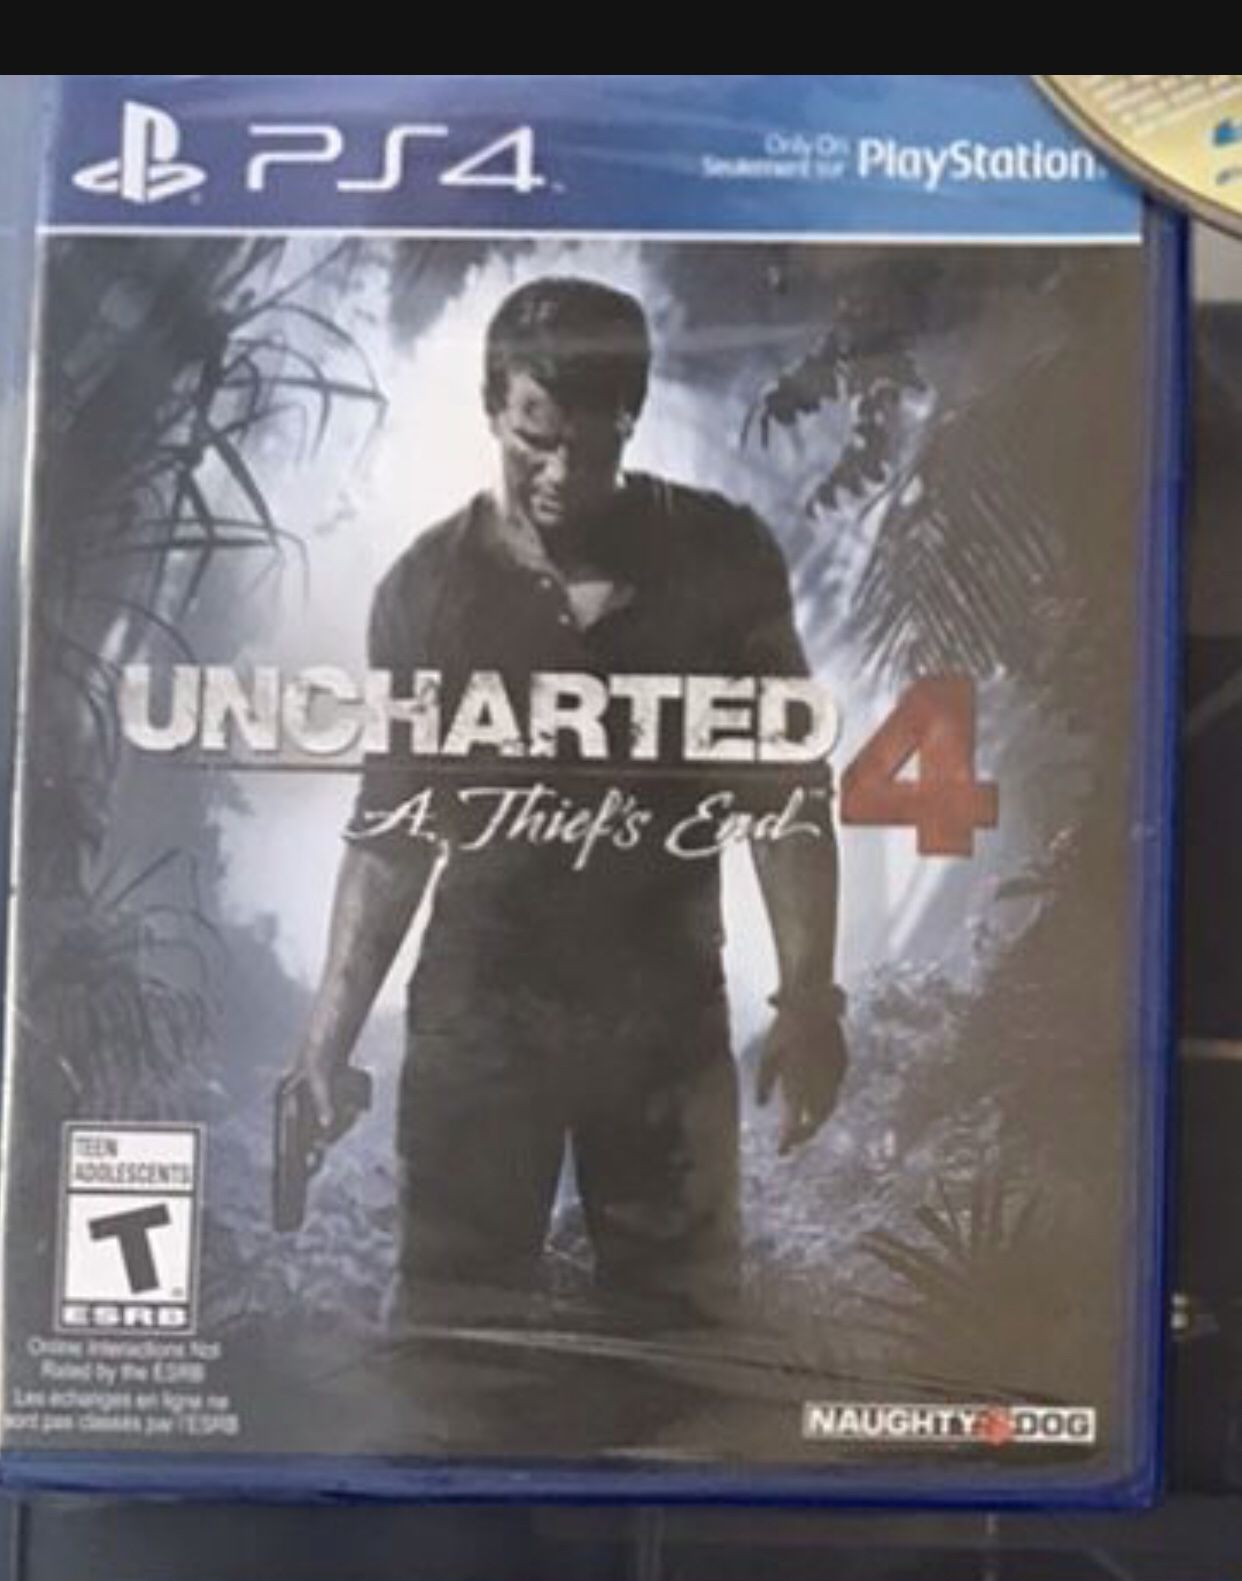 PS4 game Uncharted is brand new and sealed